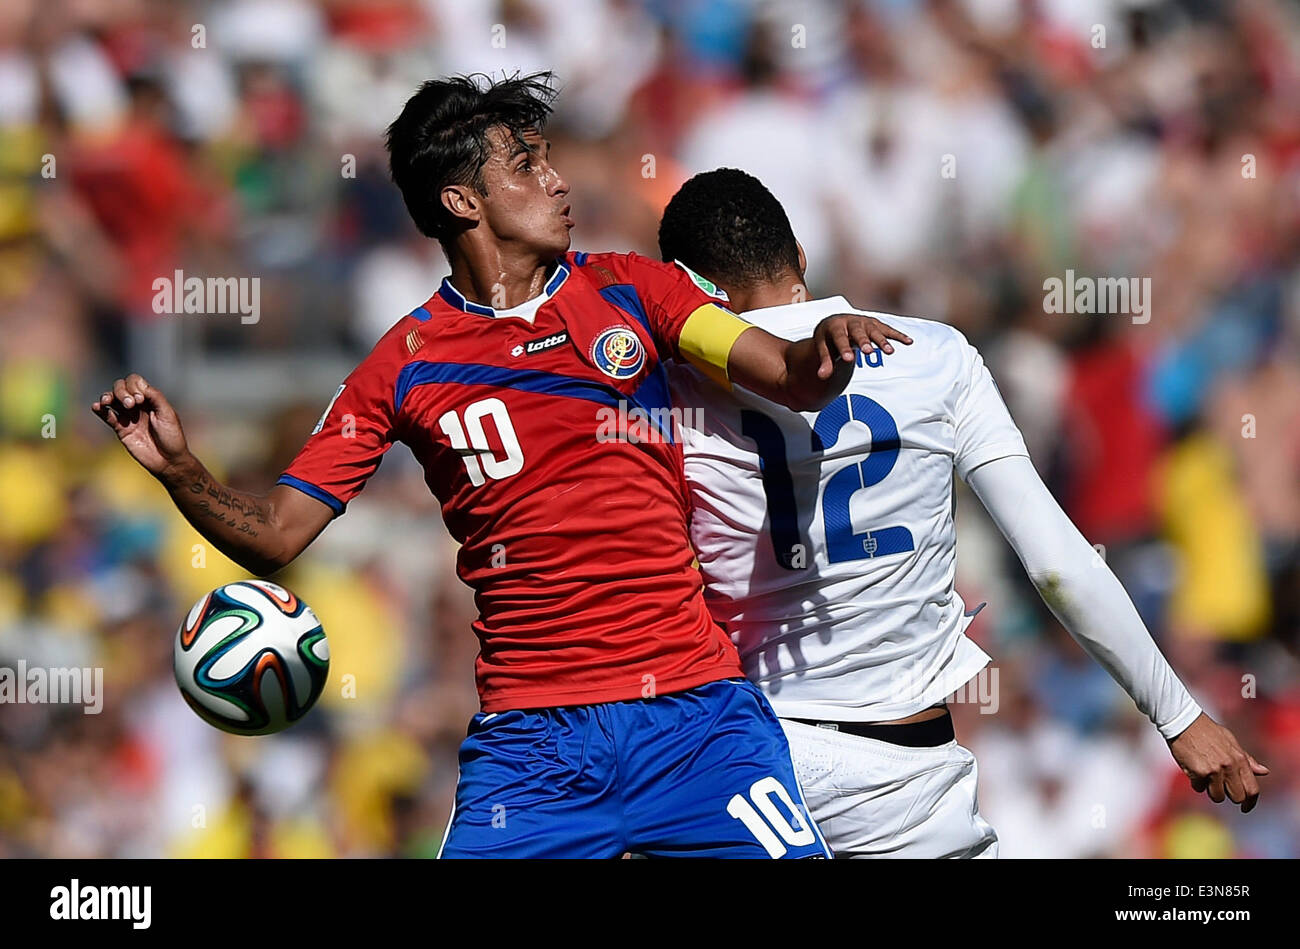 Belo Horizonte, Brazil. 24th June, 2014. Costa Rica's Bryan Ruiz (L) vies with England's Chris Smalling during a Group D match between Costa Rica and England of 2014 FIFA World Cup at the Estadio Mineirao Stadium in Belo Horizonte, Brazil, on June 24, 2014. England drew 0-0 with Costa Rica on Tuesday. Credit:  Qi Heng/Xinhua/Alamy Live News Stock Photo